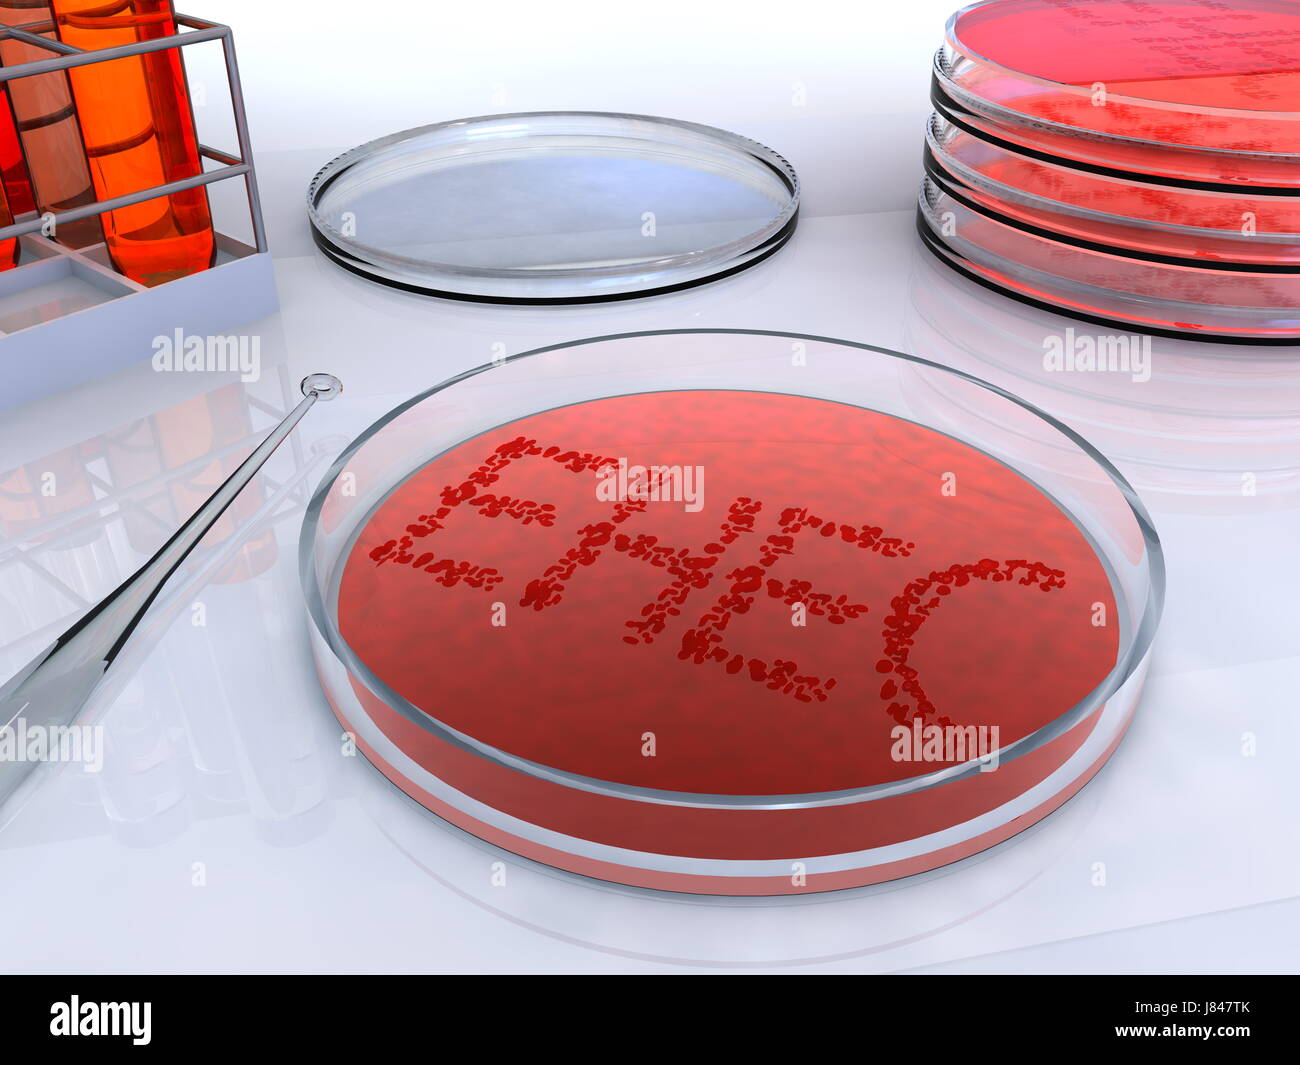 virus viruses exciter petri dish ehec germs science research reaction test Stock Photo